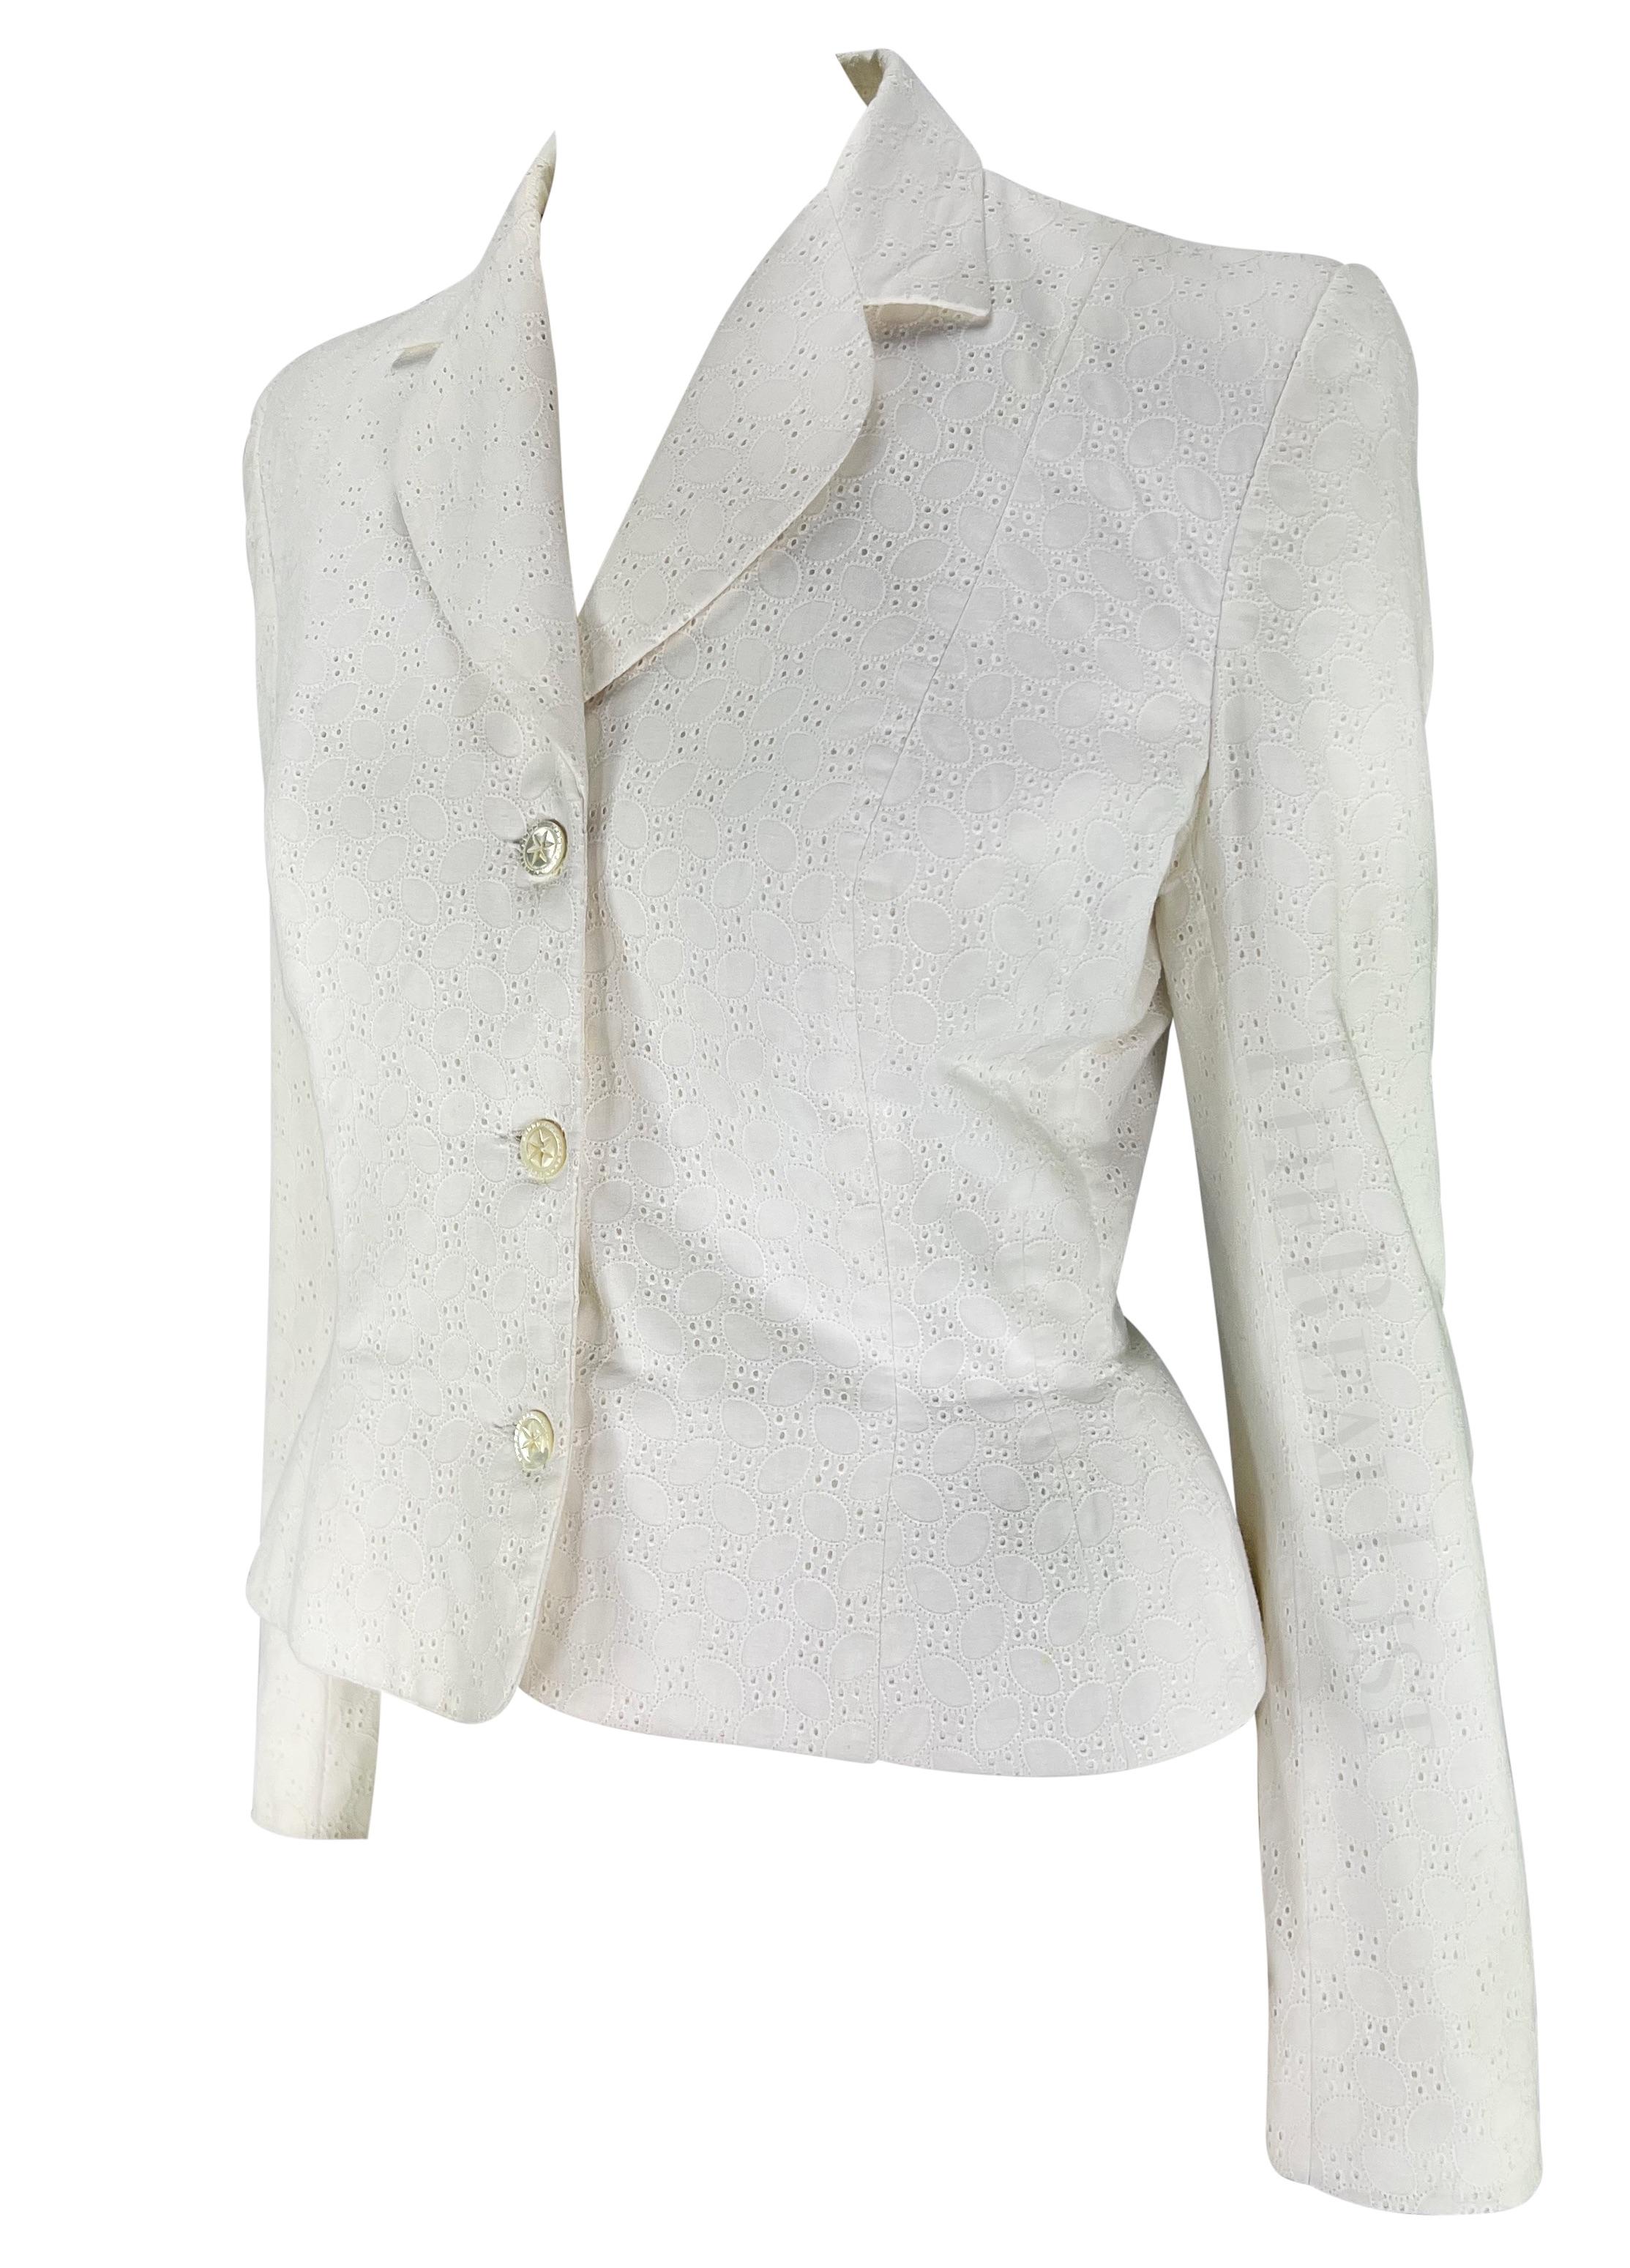 S/S 1996 John Galliano Paris Broderie Anglaise Ballet Peplum White Jacket Blazer In Excellent Condition For Sale In West Hollywood, CA